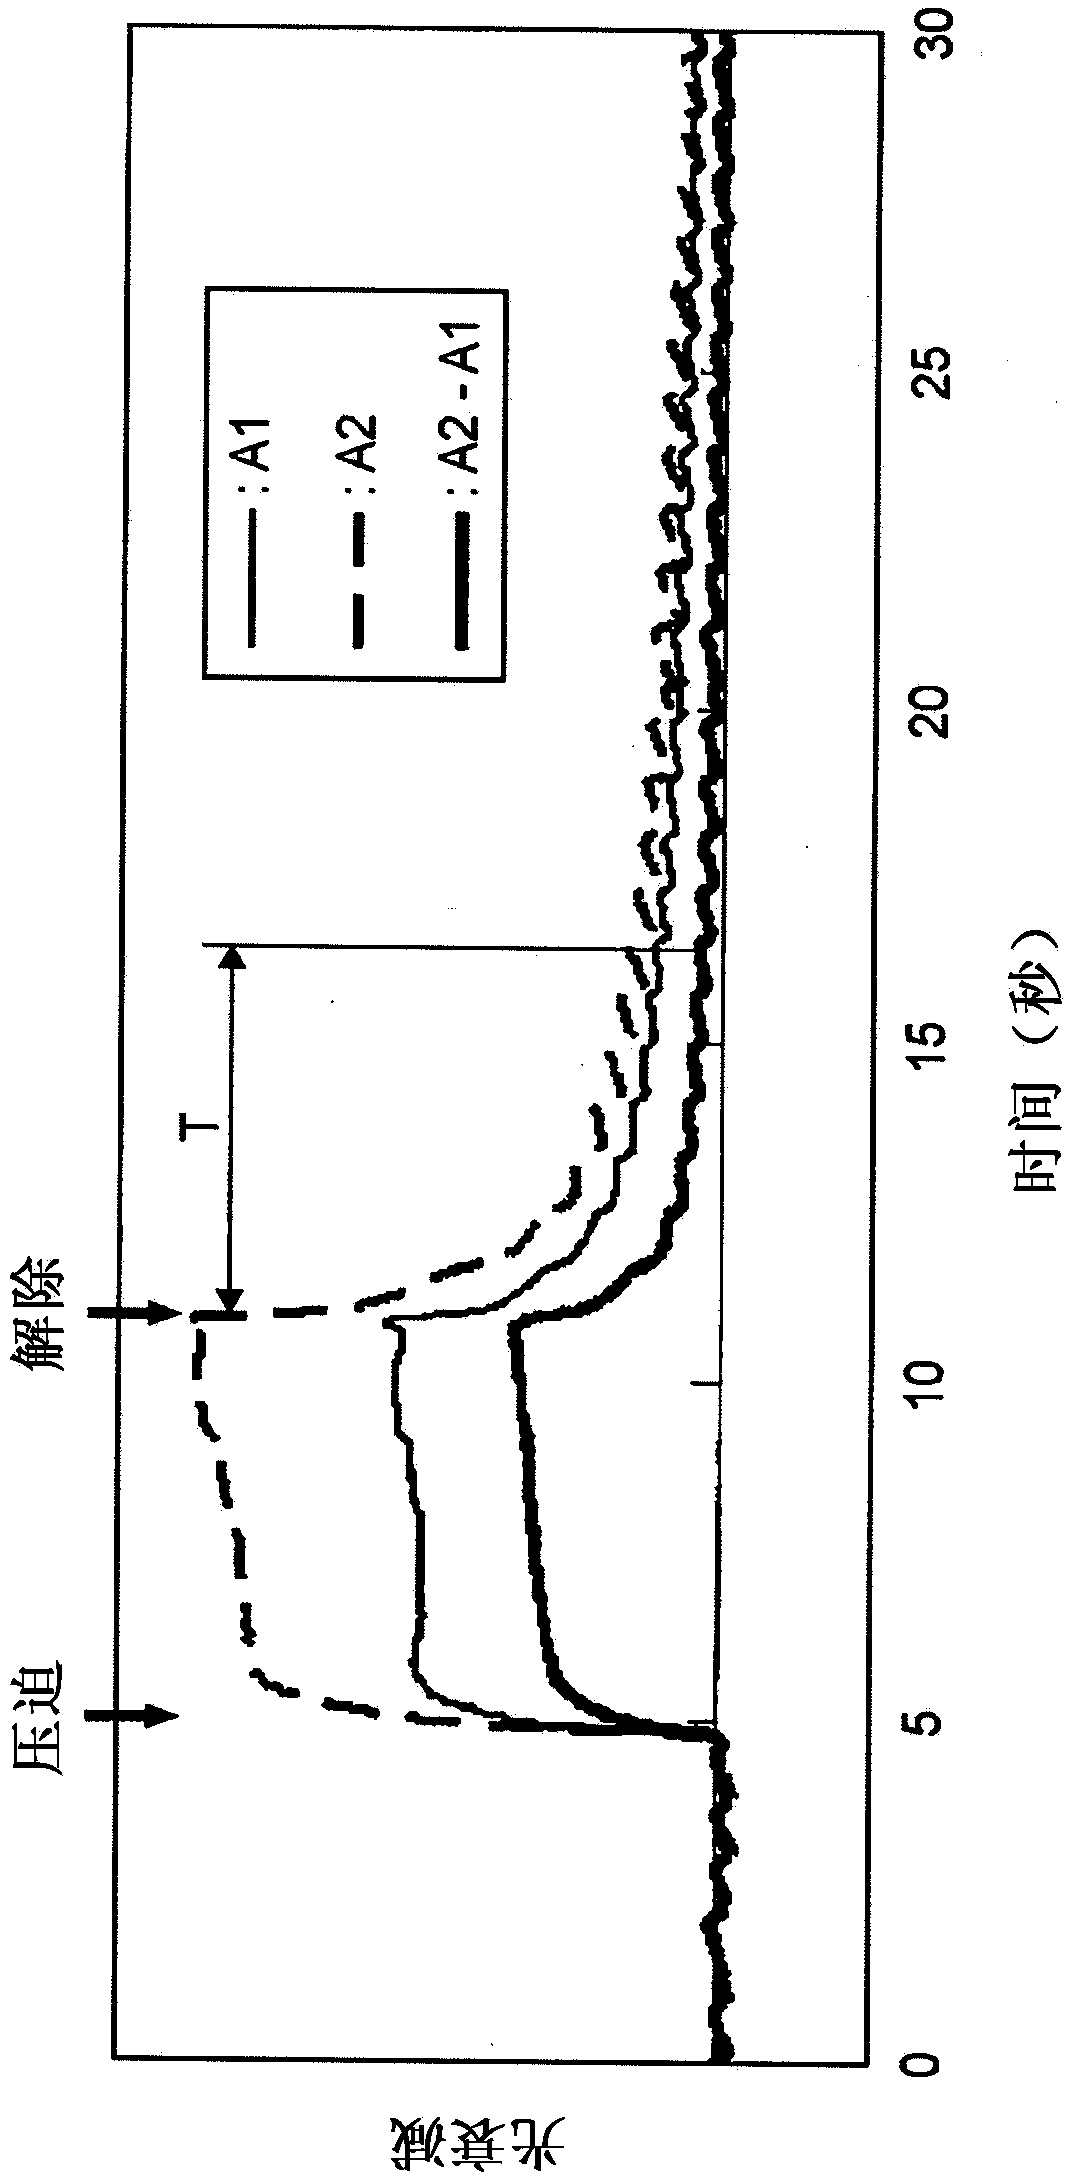 Biological signal measuring system and biological signal measuring apparatus